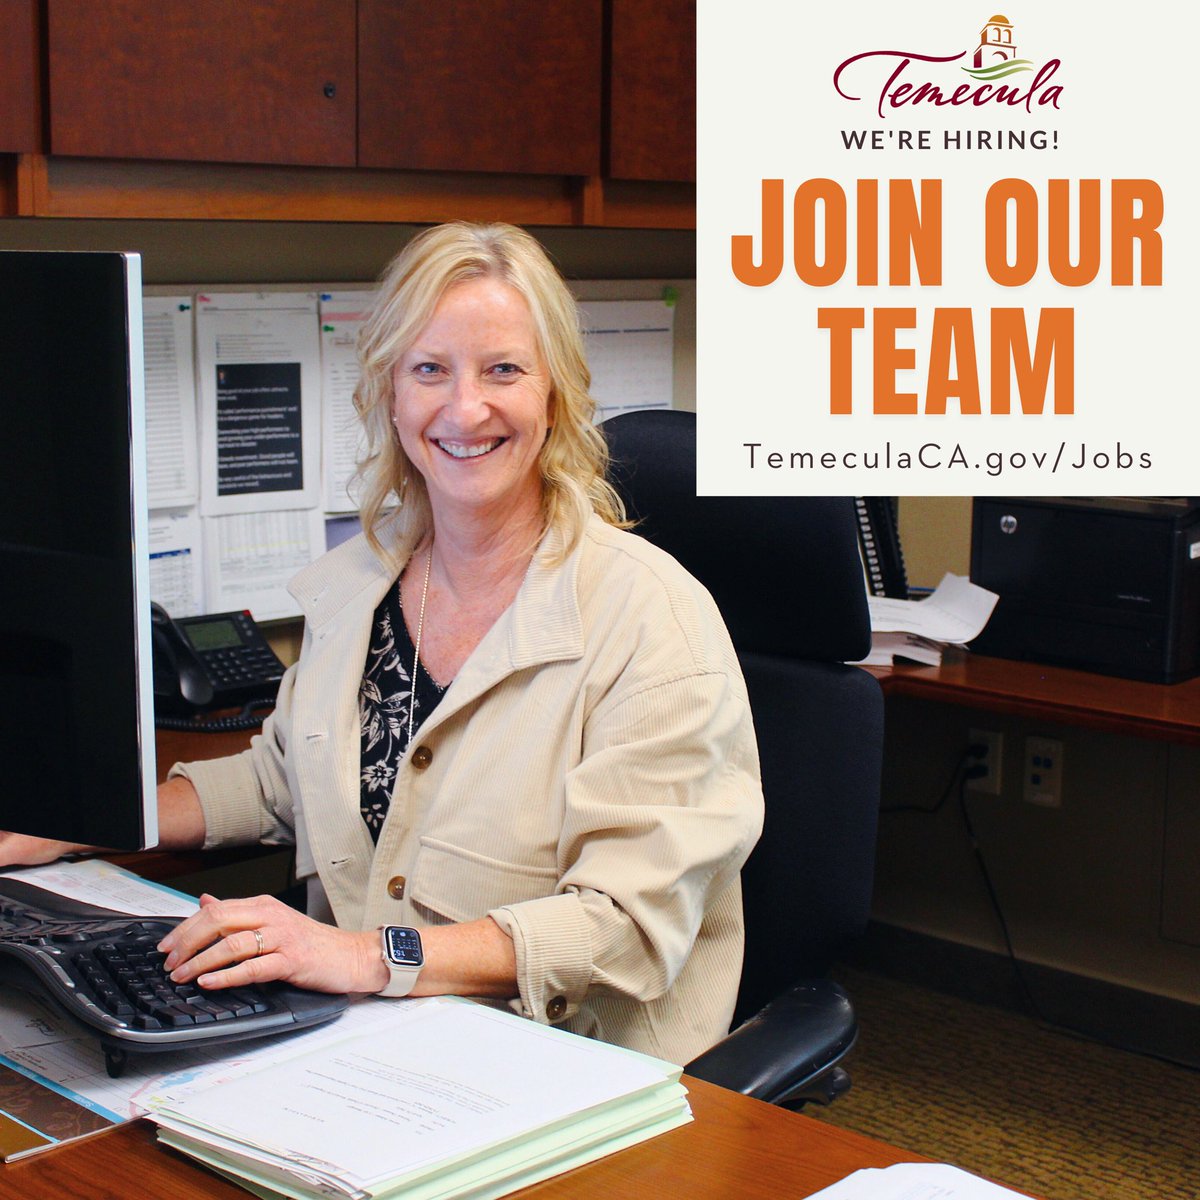 The City of Temecula is hiring! 📣   The Temecula Public Works Department is currently hiring a Senior or Principal Management Analyst to join our team! 📝   Learn more and apply 📲 TemeculaCA.gov/Jobs